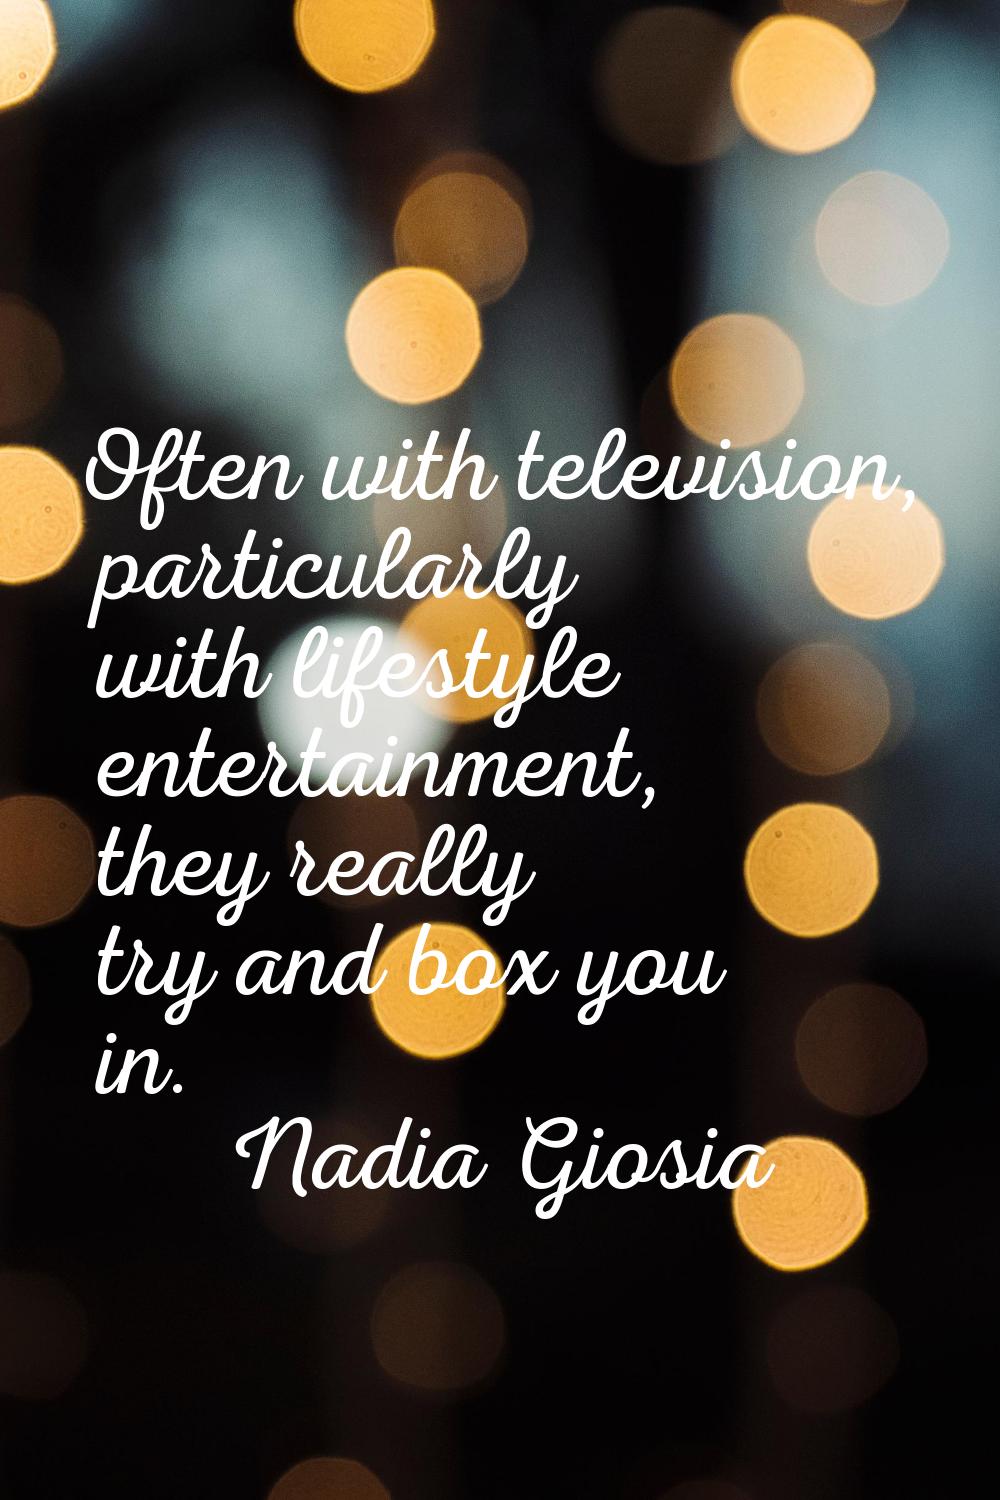 Often with television, particularly with lifestyle entertainment, they really try and box you in.